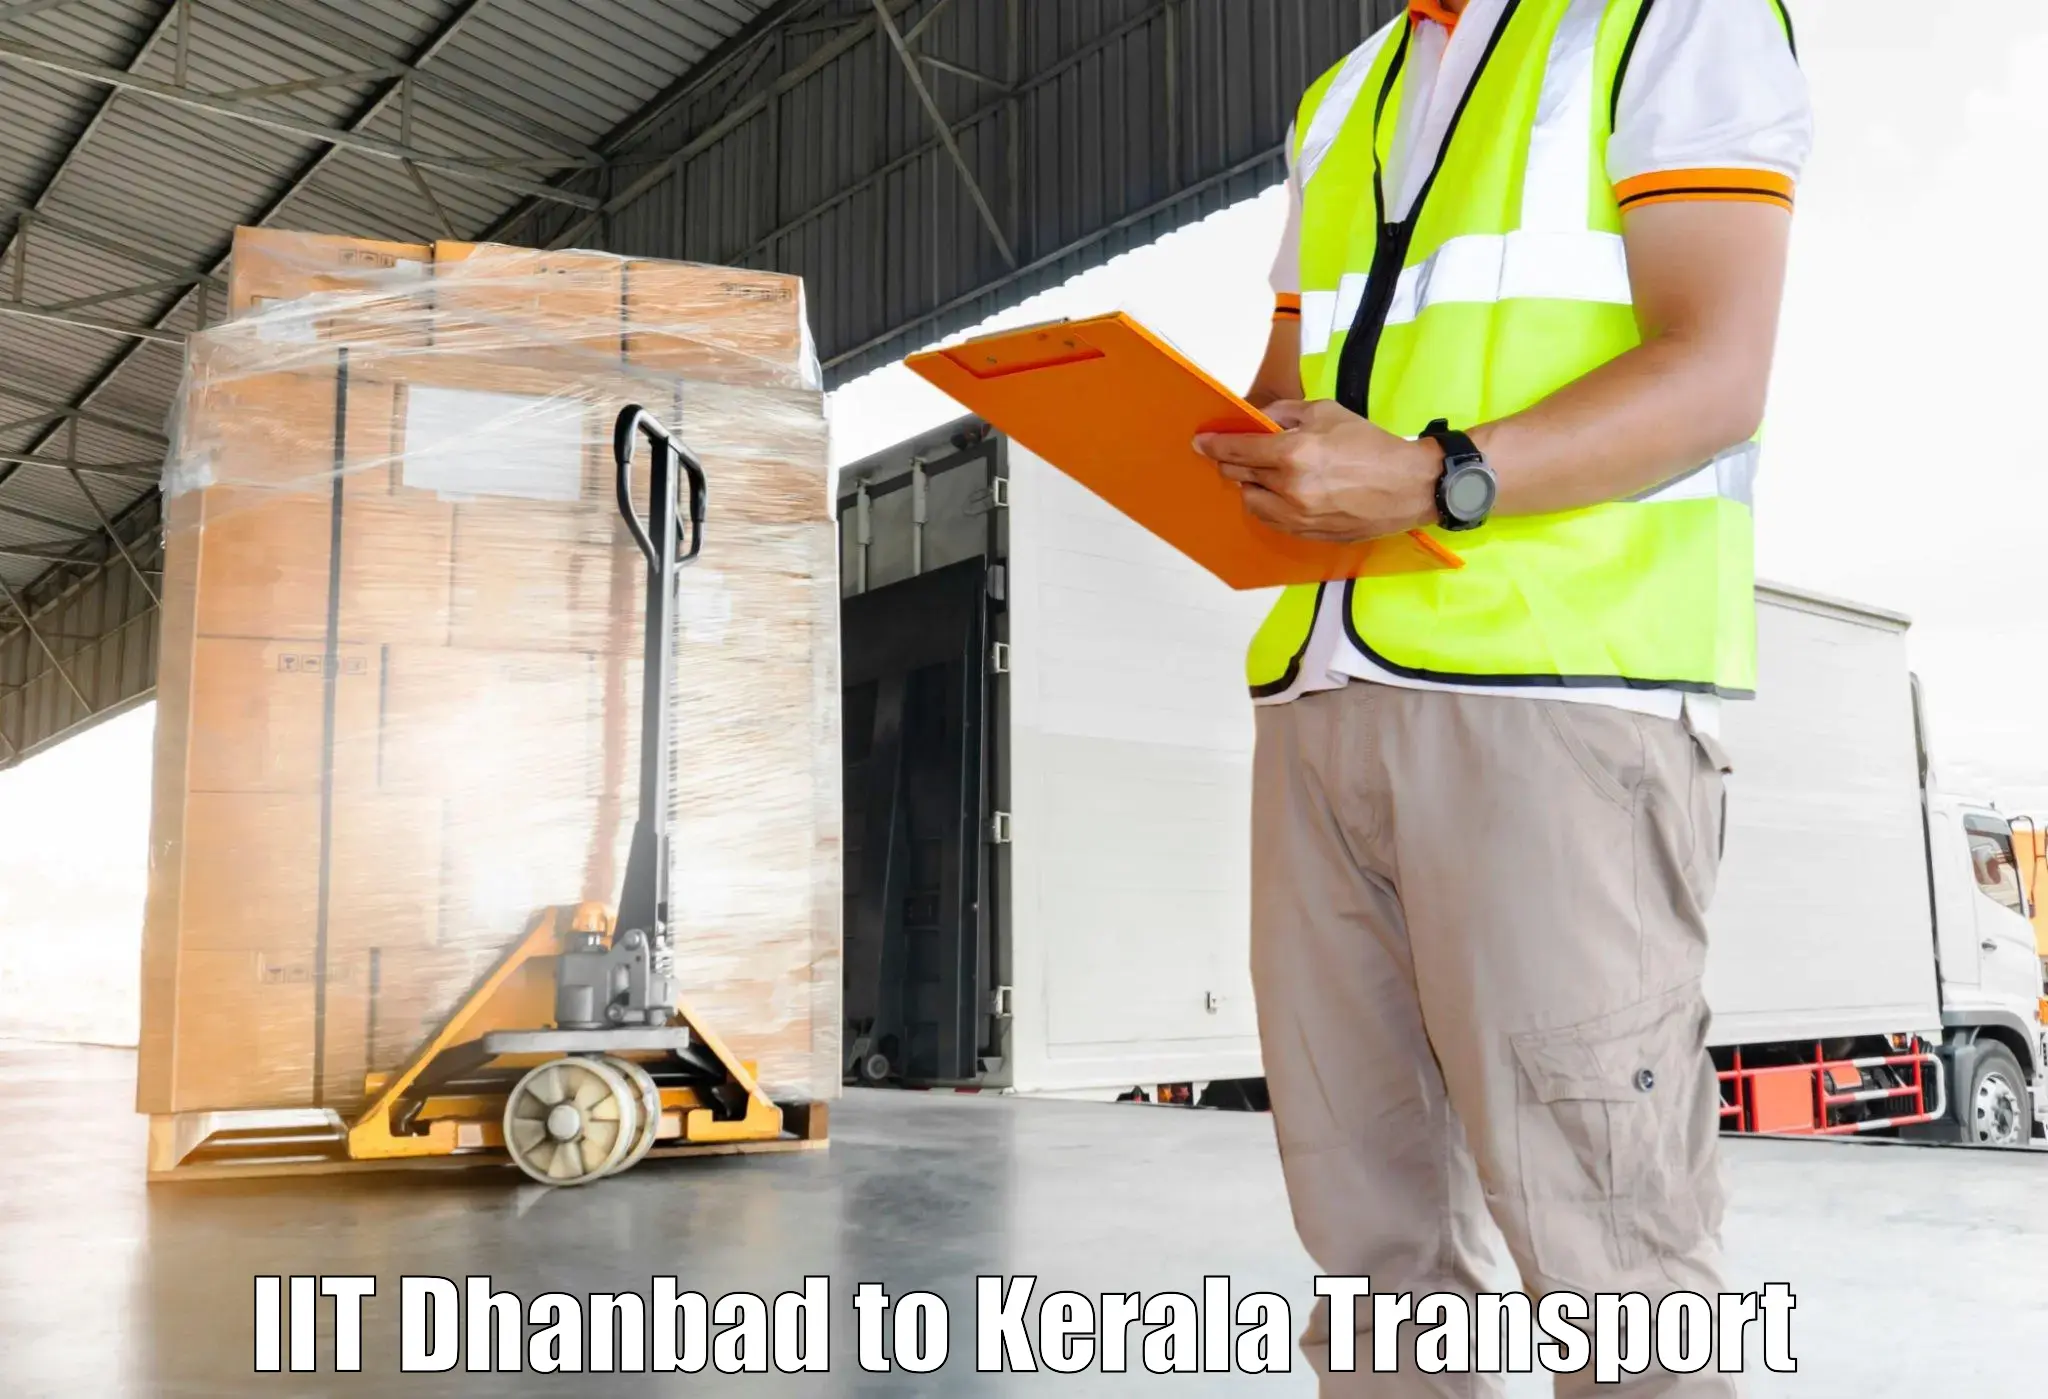 Container transport service IIT Dhanbad to Valanchery